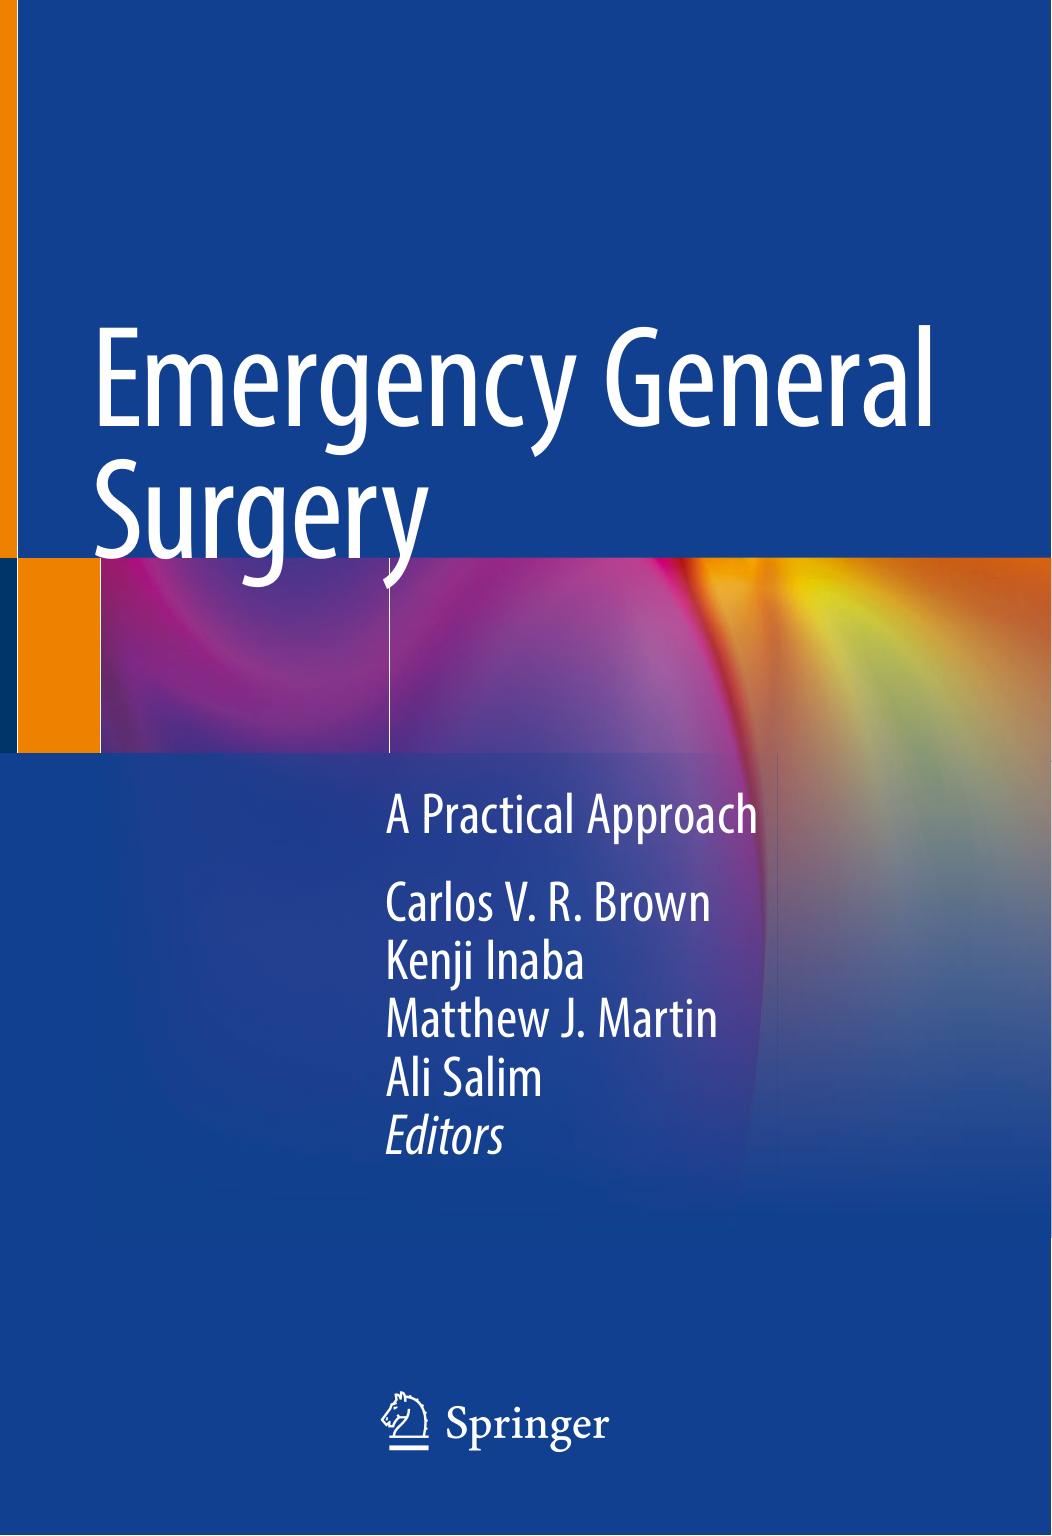 Emergency General Surgery A Practical Approach 2019